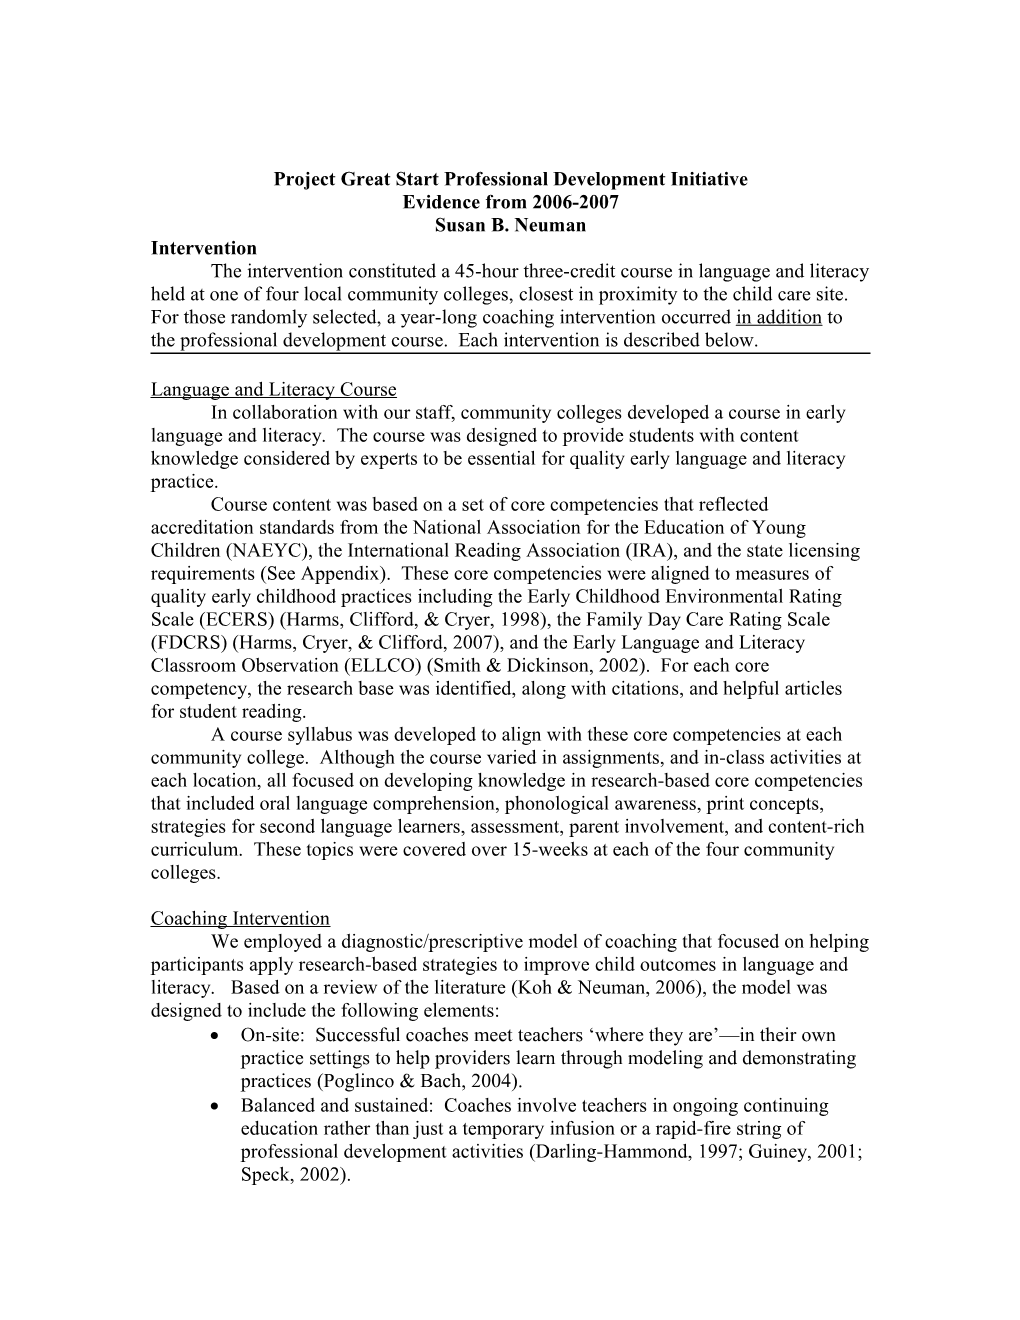 Project Great Start Professional Development Initiative, Evidence from 2006-2007 (MS Word)